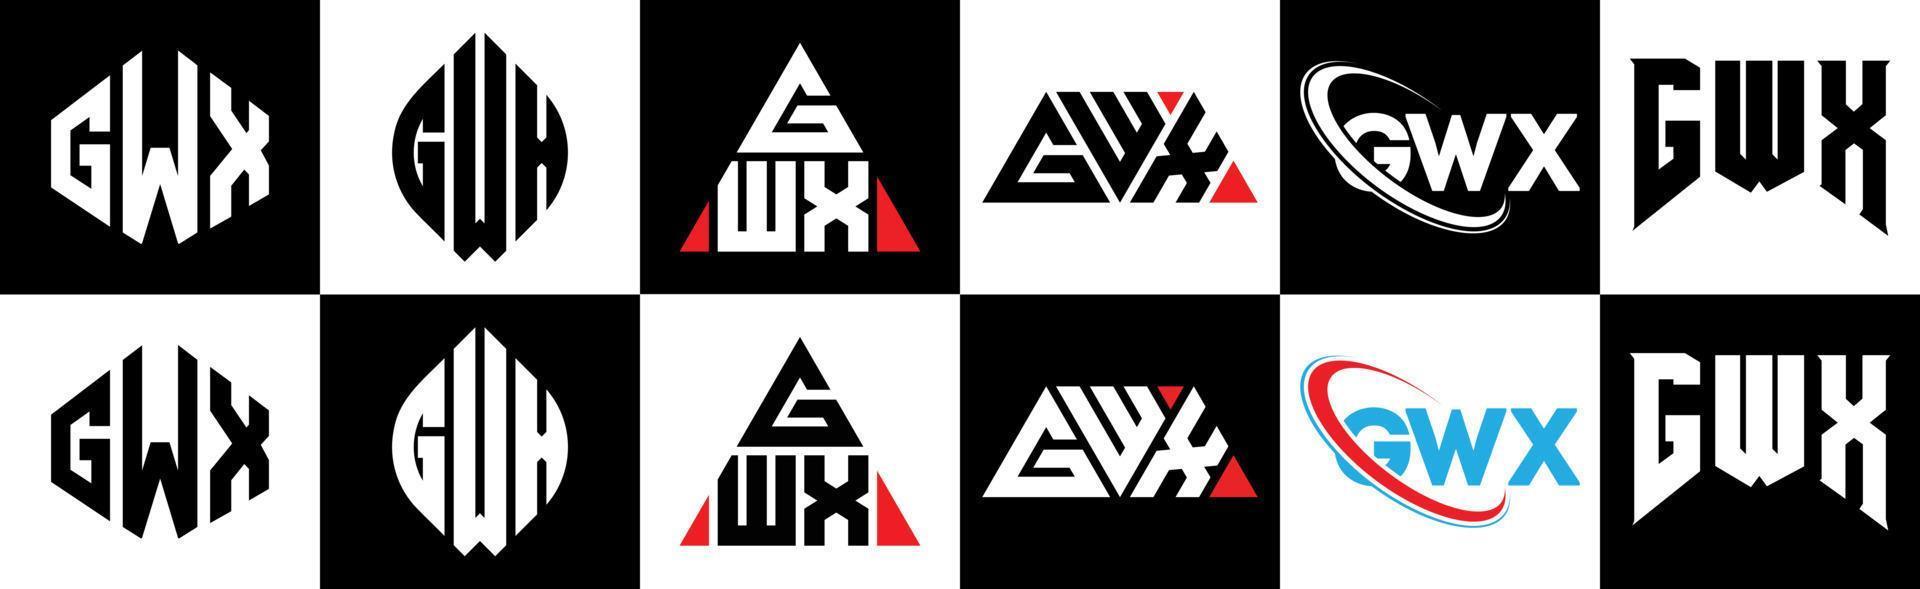 GWX letter logo design in six style. GWX polygon, circle, triangle, hexagon, flat and simple style with black and white color variation letter logo set in one artboard. GWX minimalist and classic logo vector